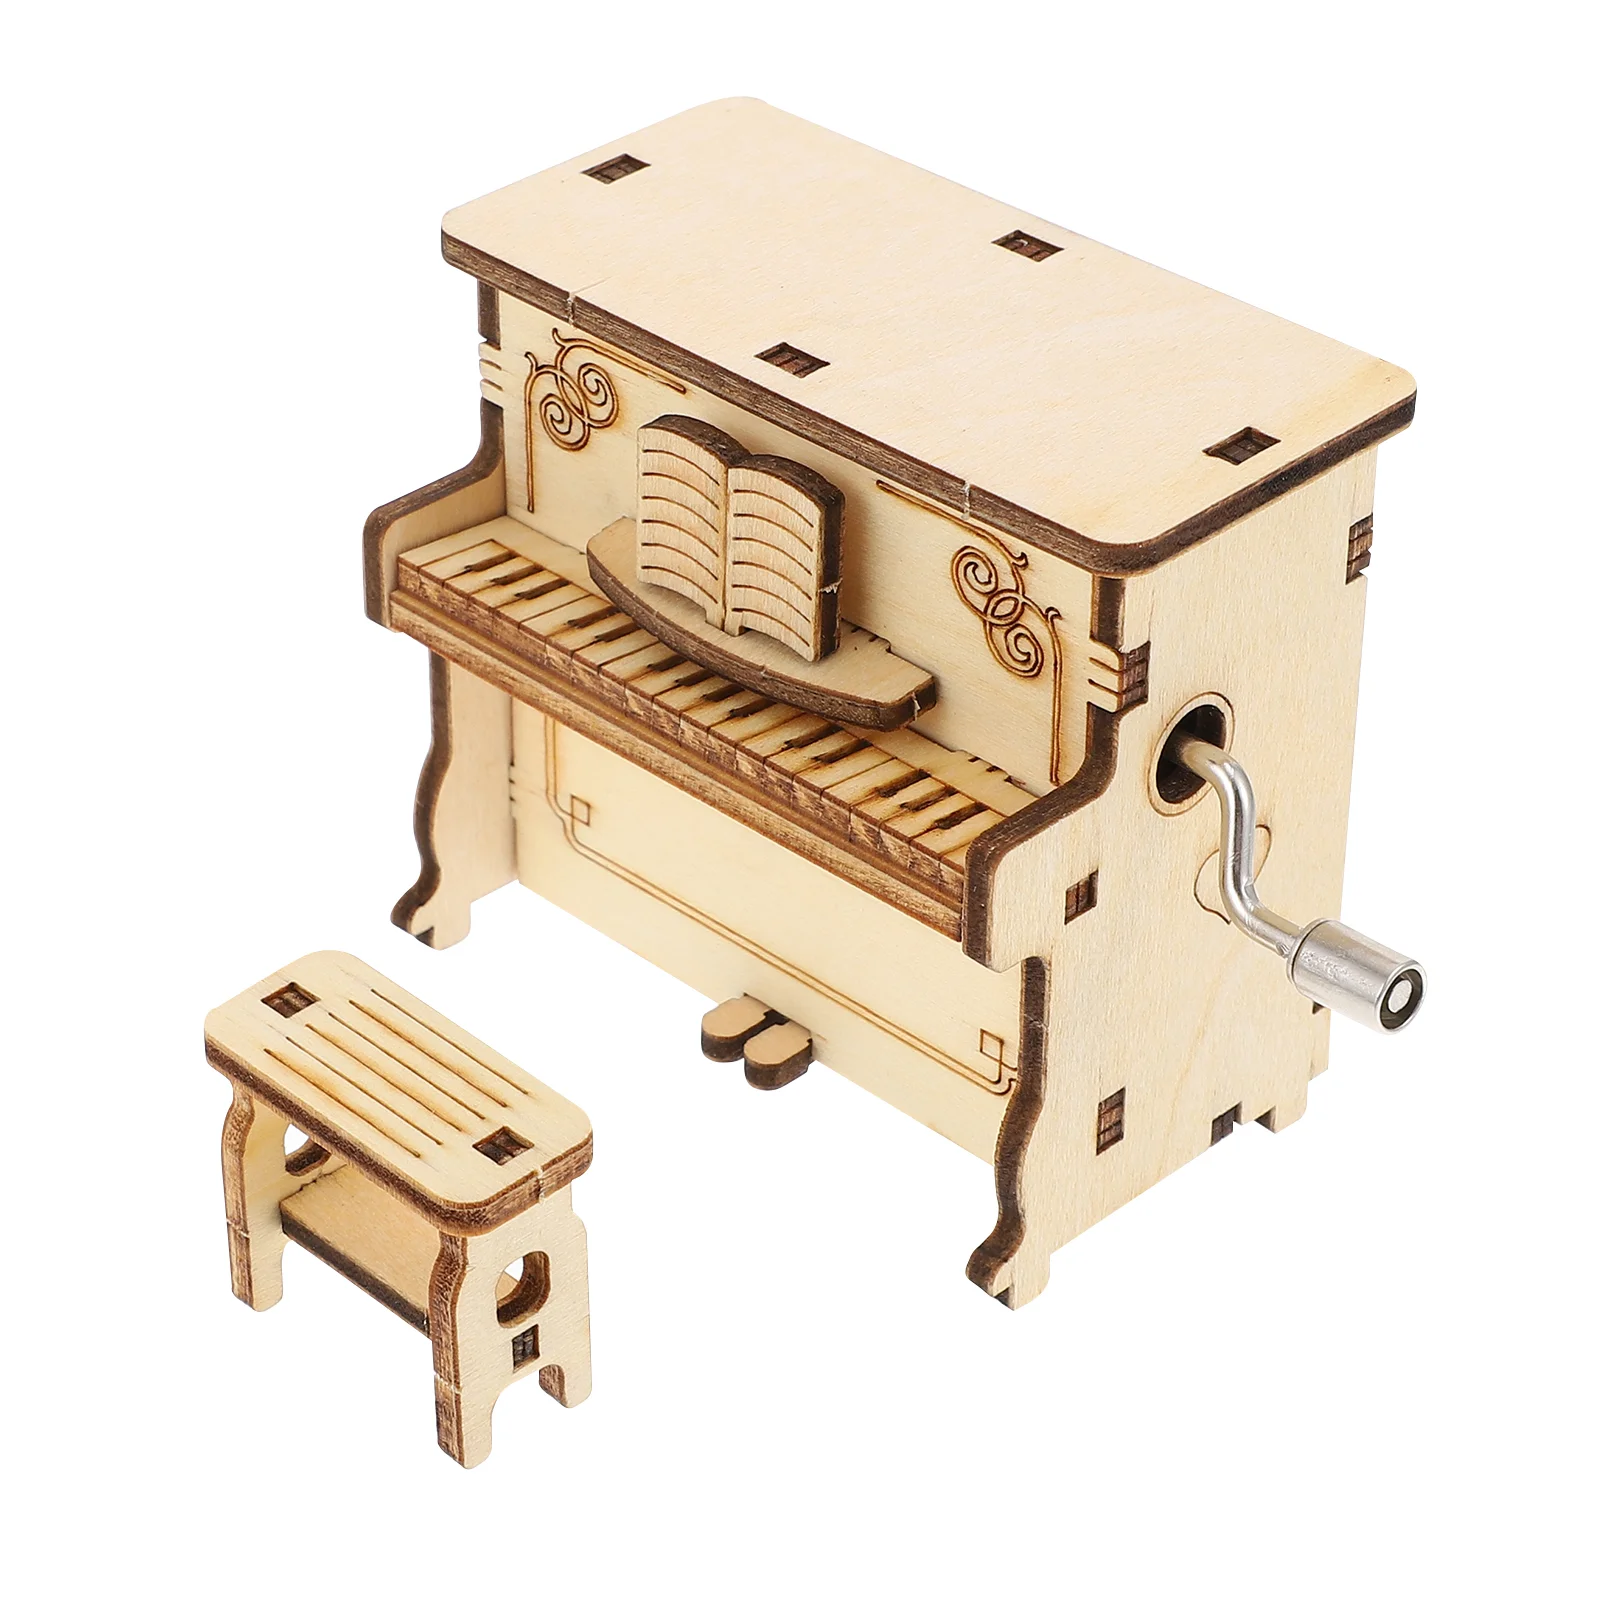 Model Piano Music Box Child Wooden Puzzle Adults Mechanical Puzzles Educational Plaything model piano music box child wooden puzzle adults mechanical puzzles educational plaything